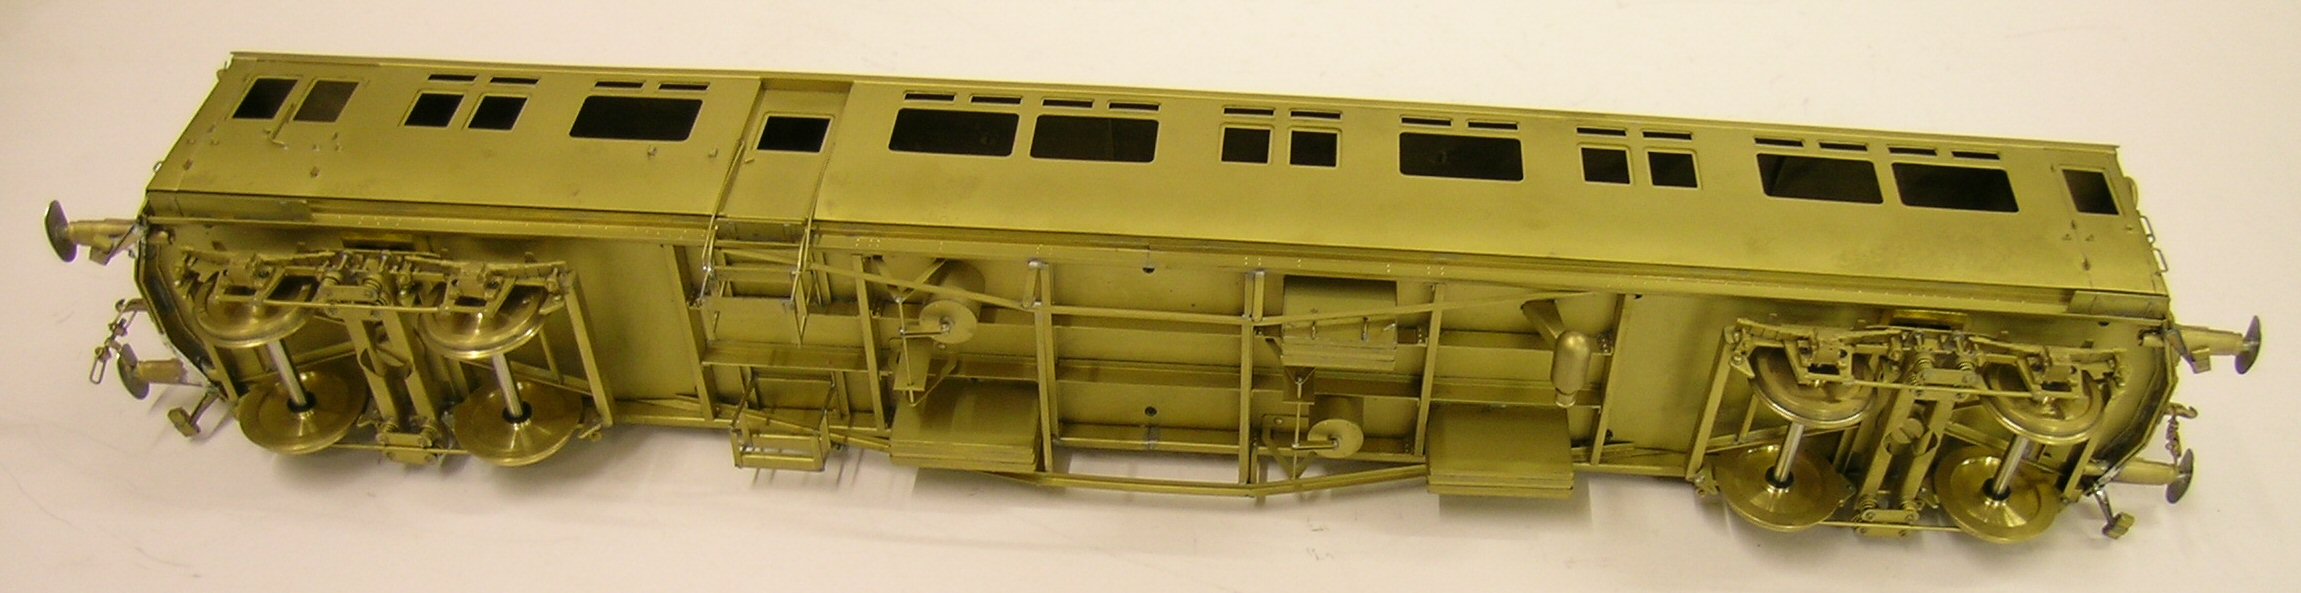 Image showing the underframe details on the diagram A28 Autocoach.